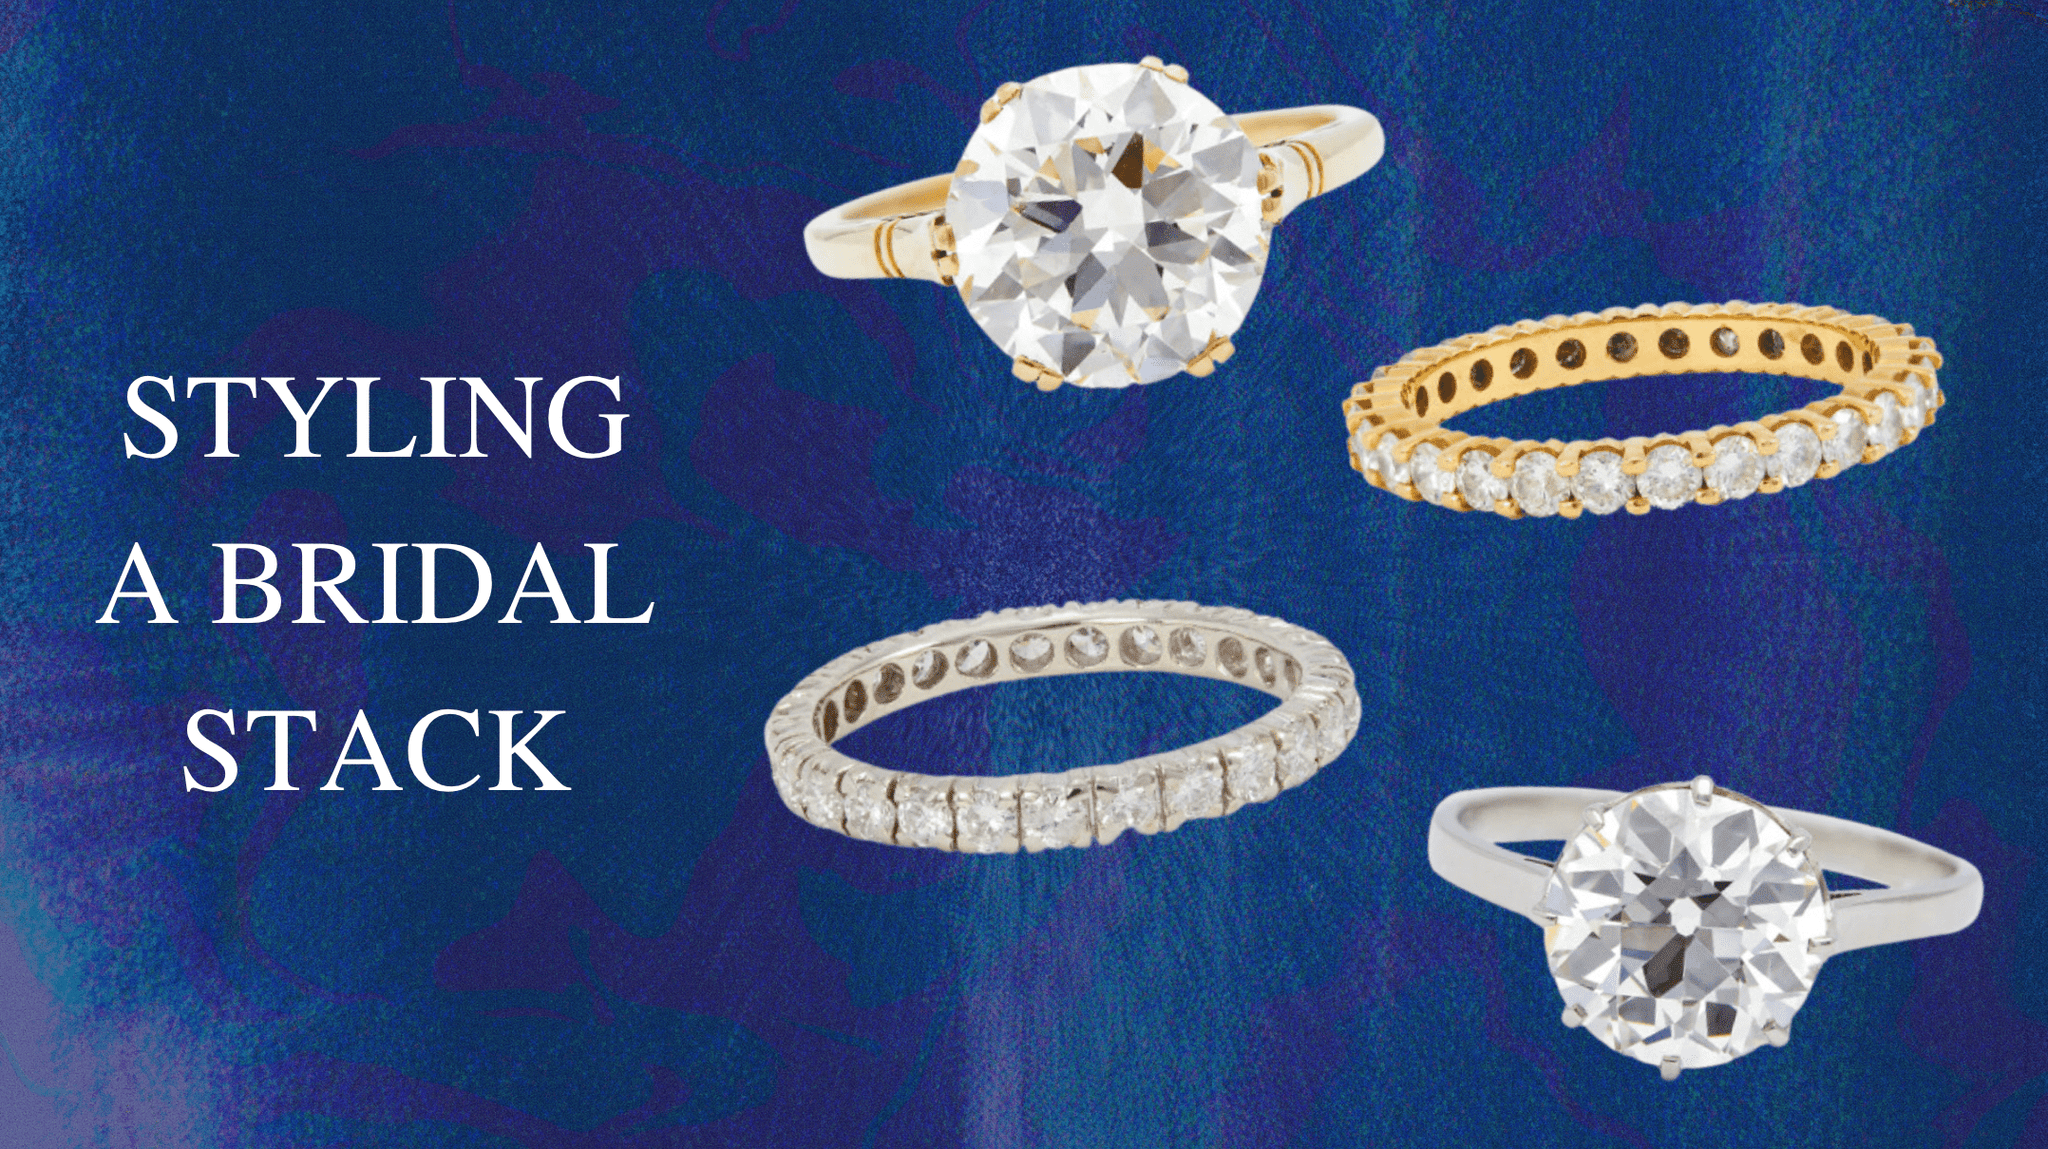 Styling a Bridal Stack: The World is your Oyster - Jack Weir & Sons